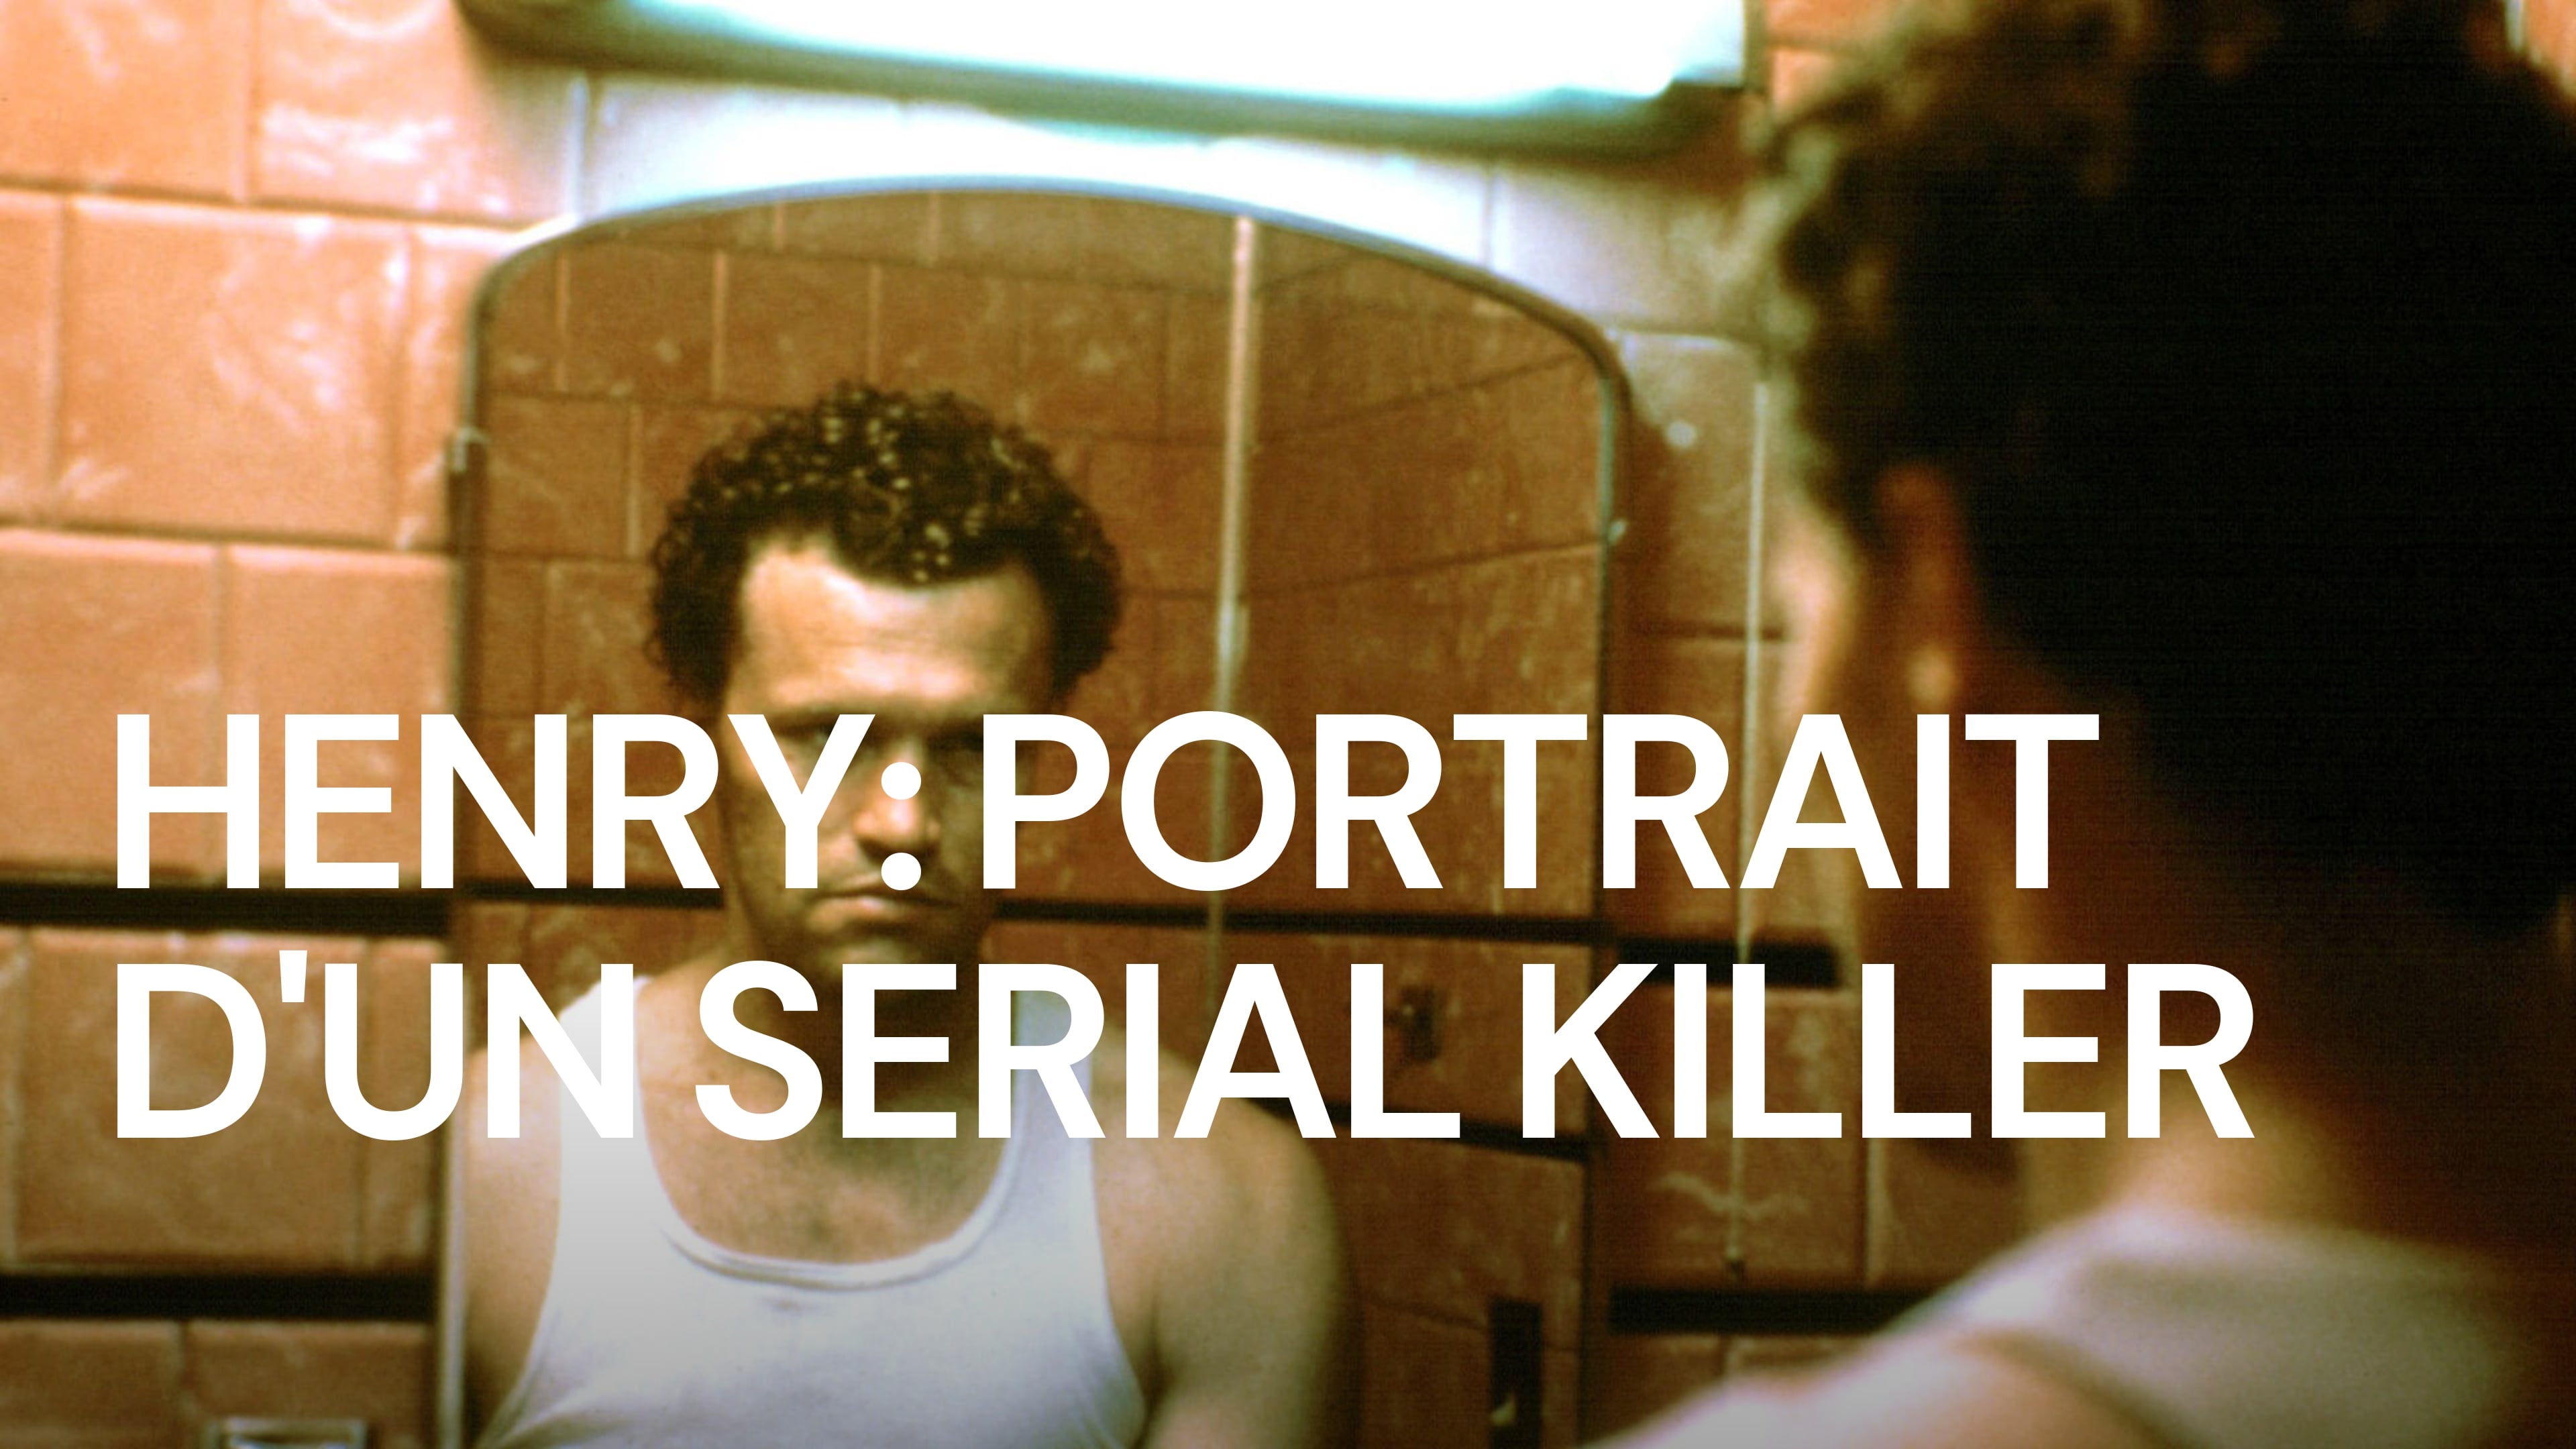 37-facts-about-the-movie-henry-portrait-of-a-serial-killer